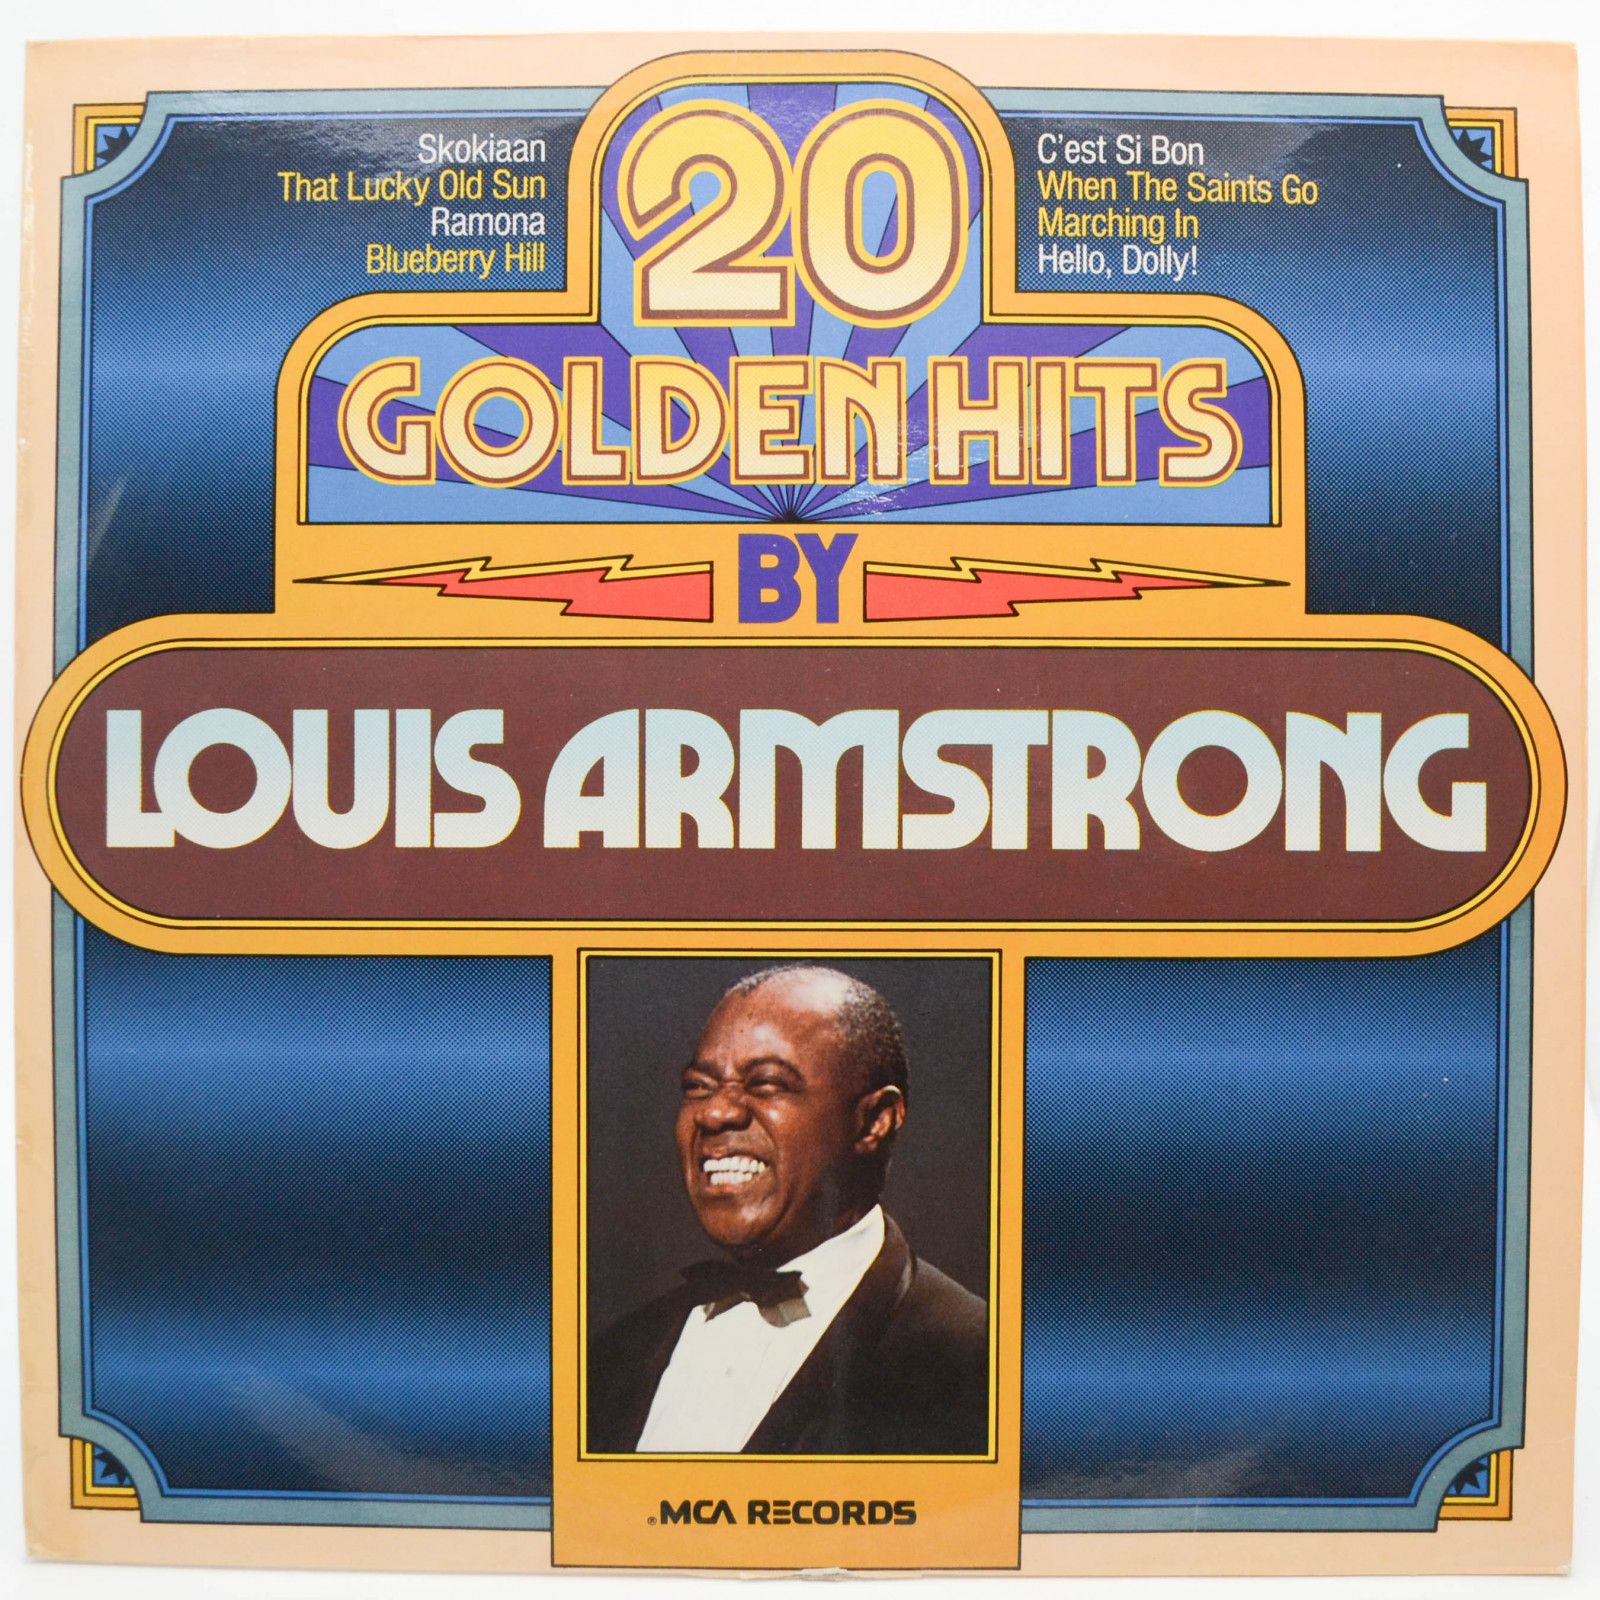 Louis Armstrong — 20 Golden Hits By Louis Armstrong, 1975